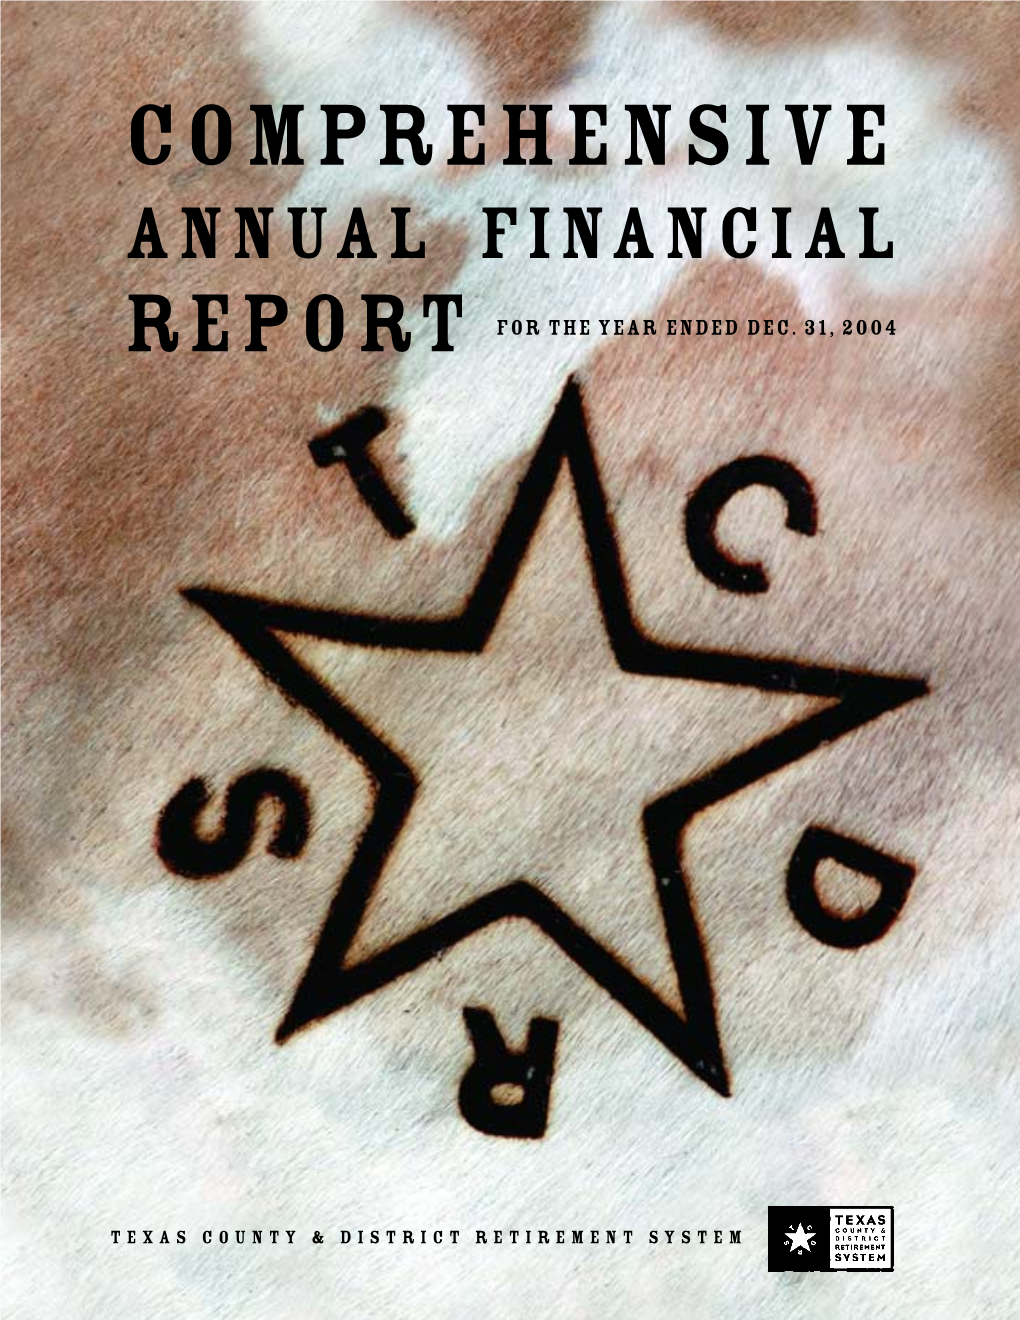 Comprehensive Annual Financial Report for the Year Ended Dec